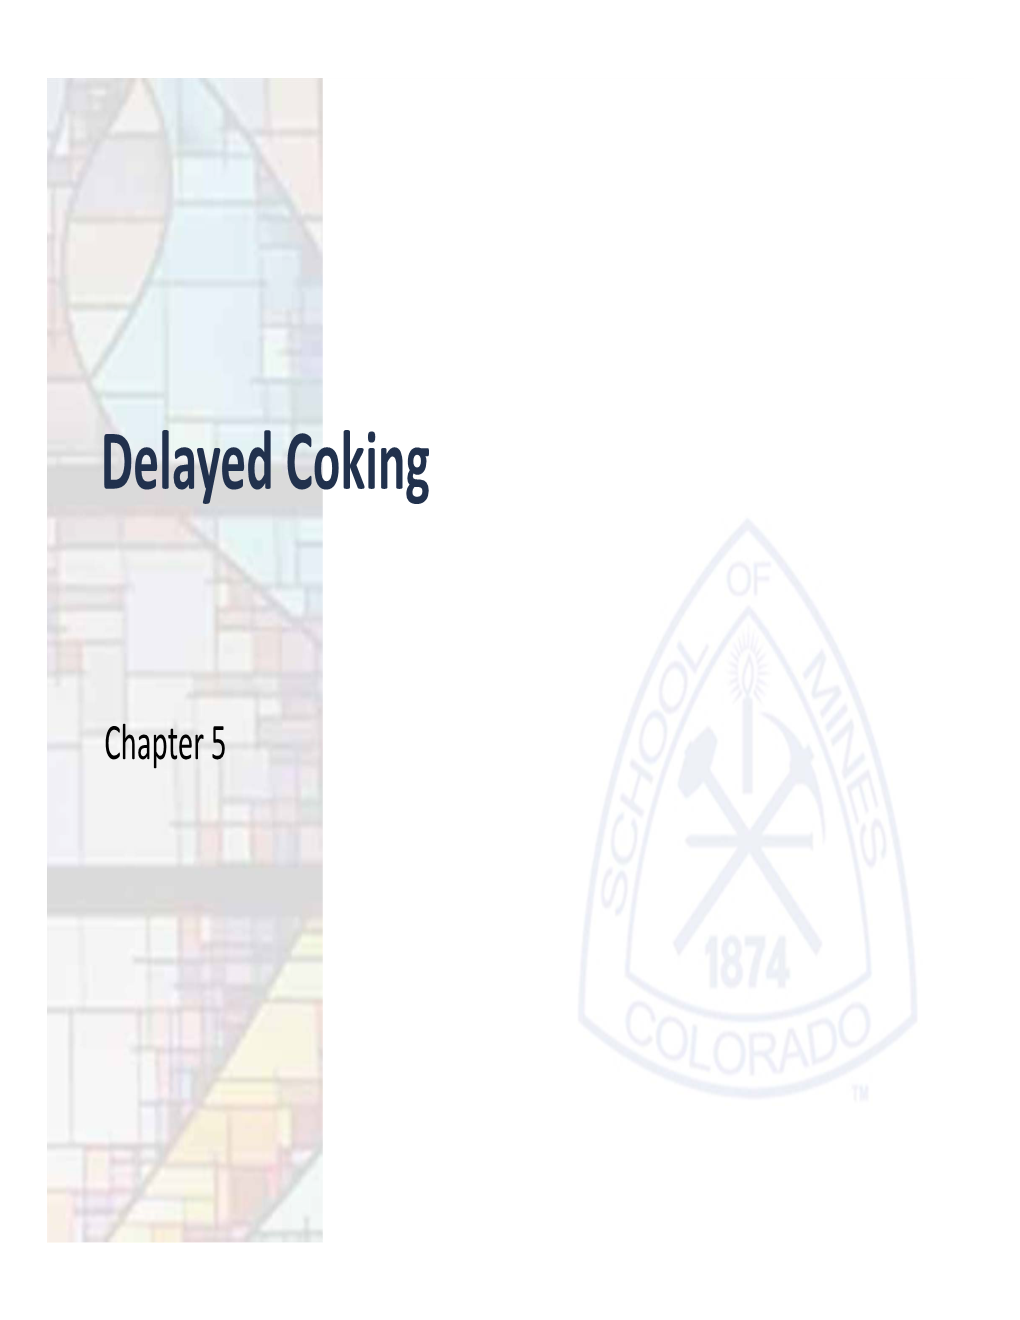 Delayed Coking